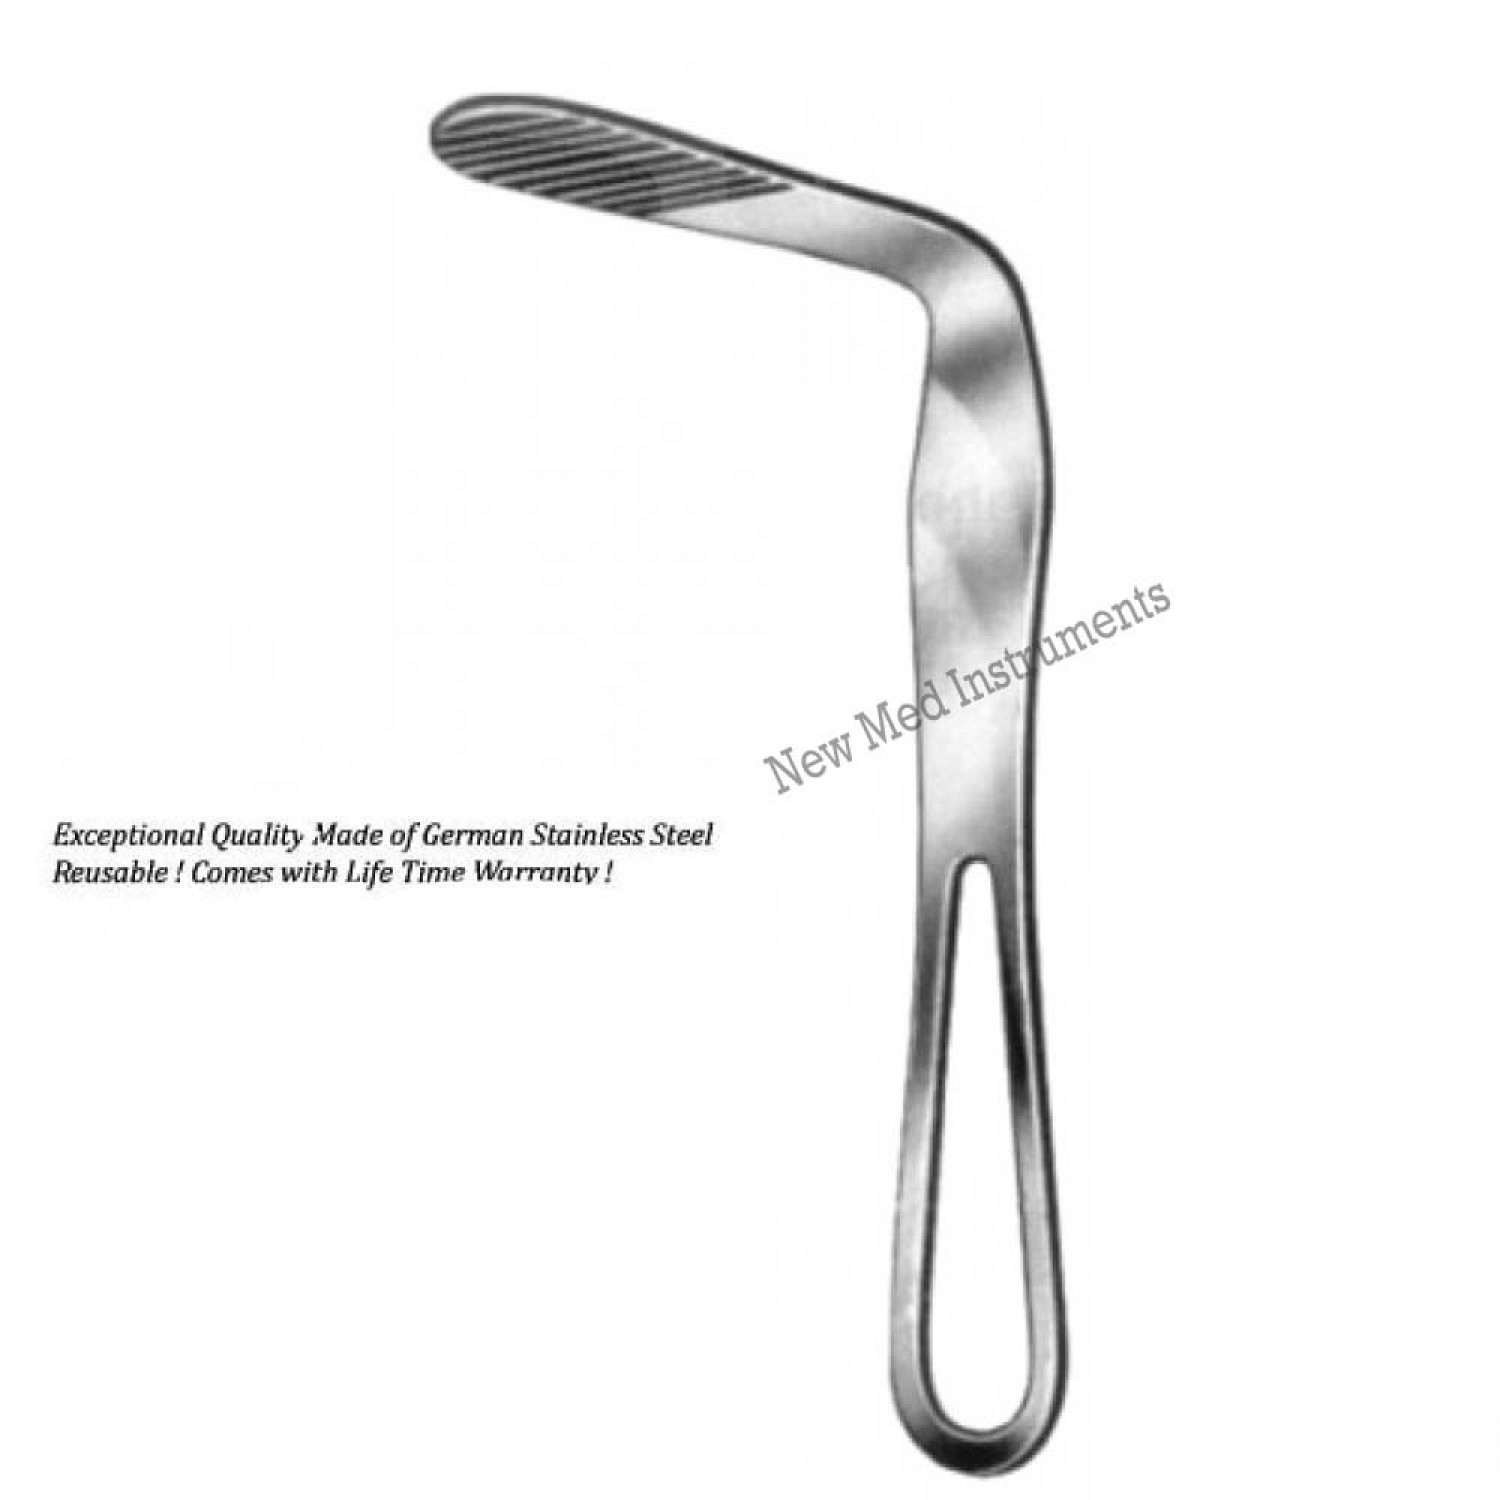 Bosworth Tongue Depressor 145 mm Stainless Steel - Jalal Surgical